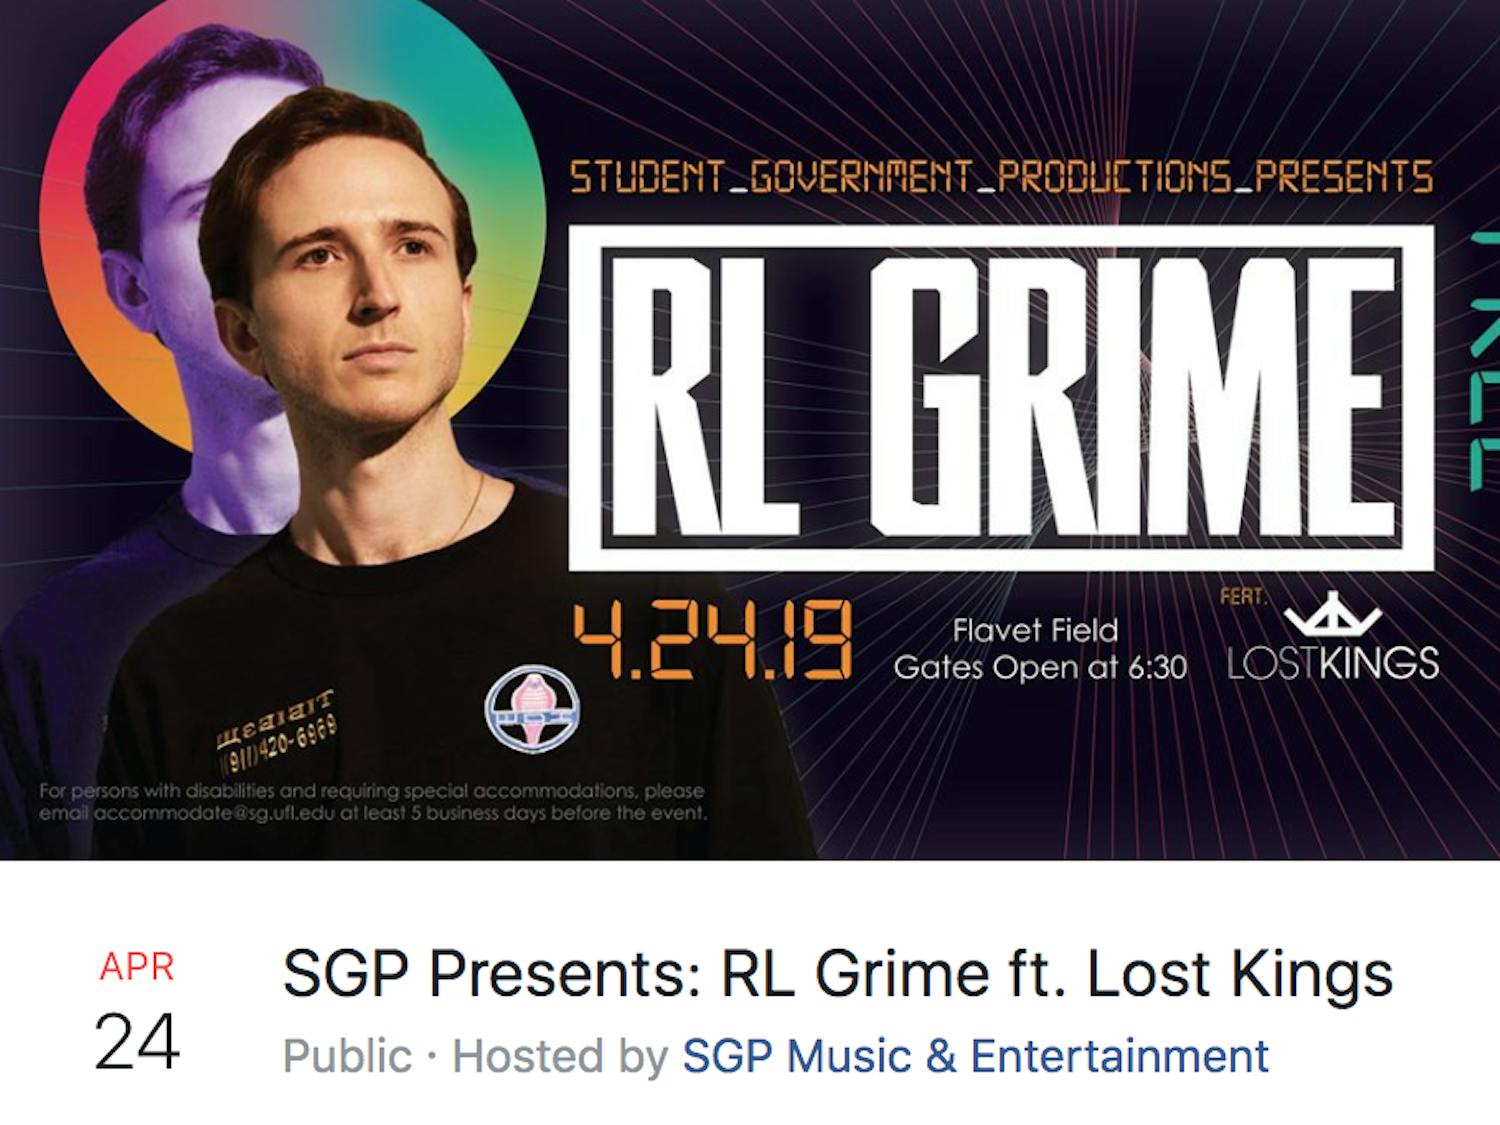 EDM artist RL Grime and Lost Kings will perform on April 24 at UF.